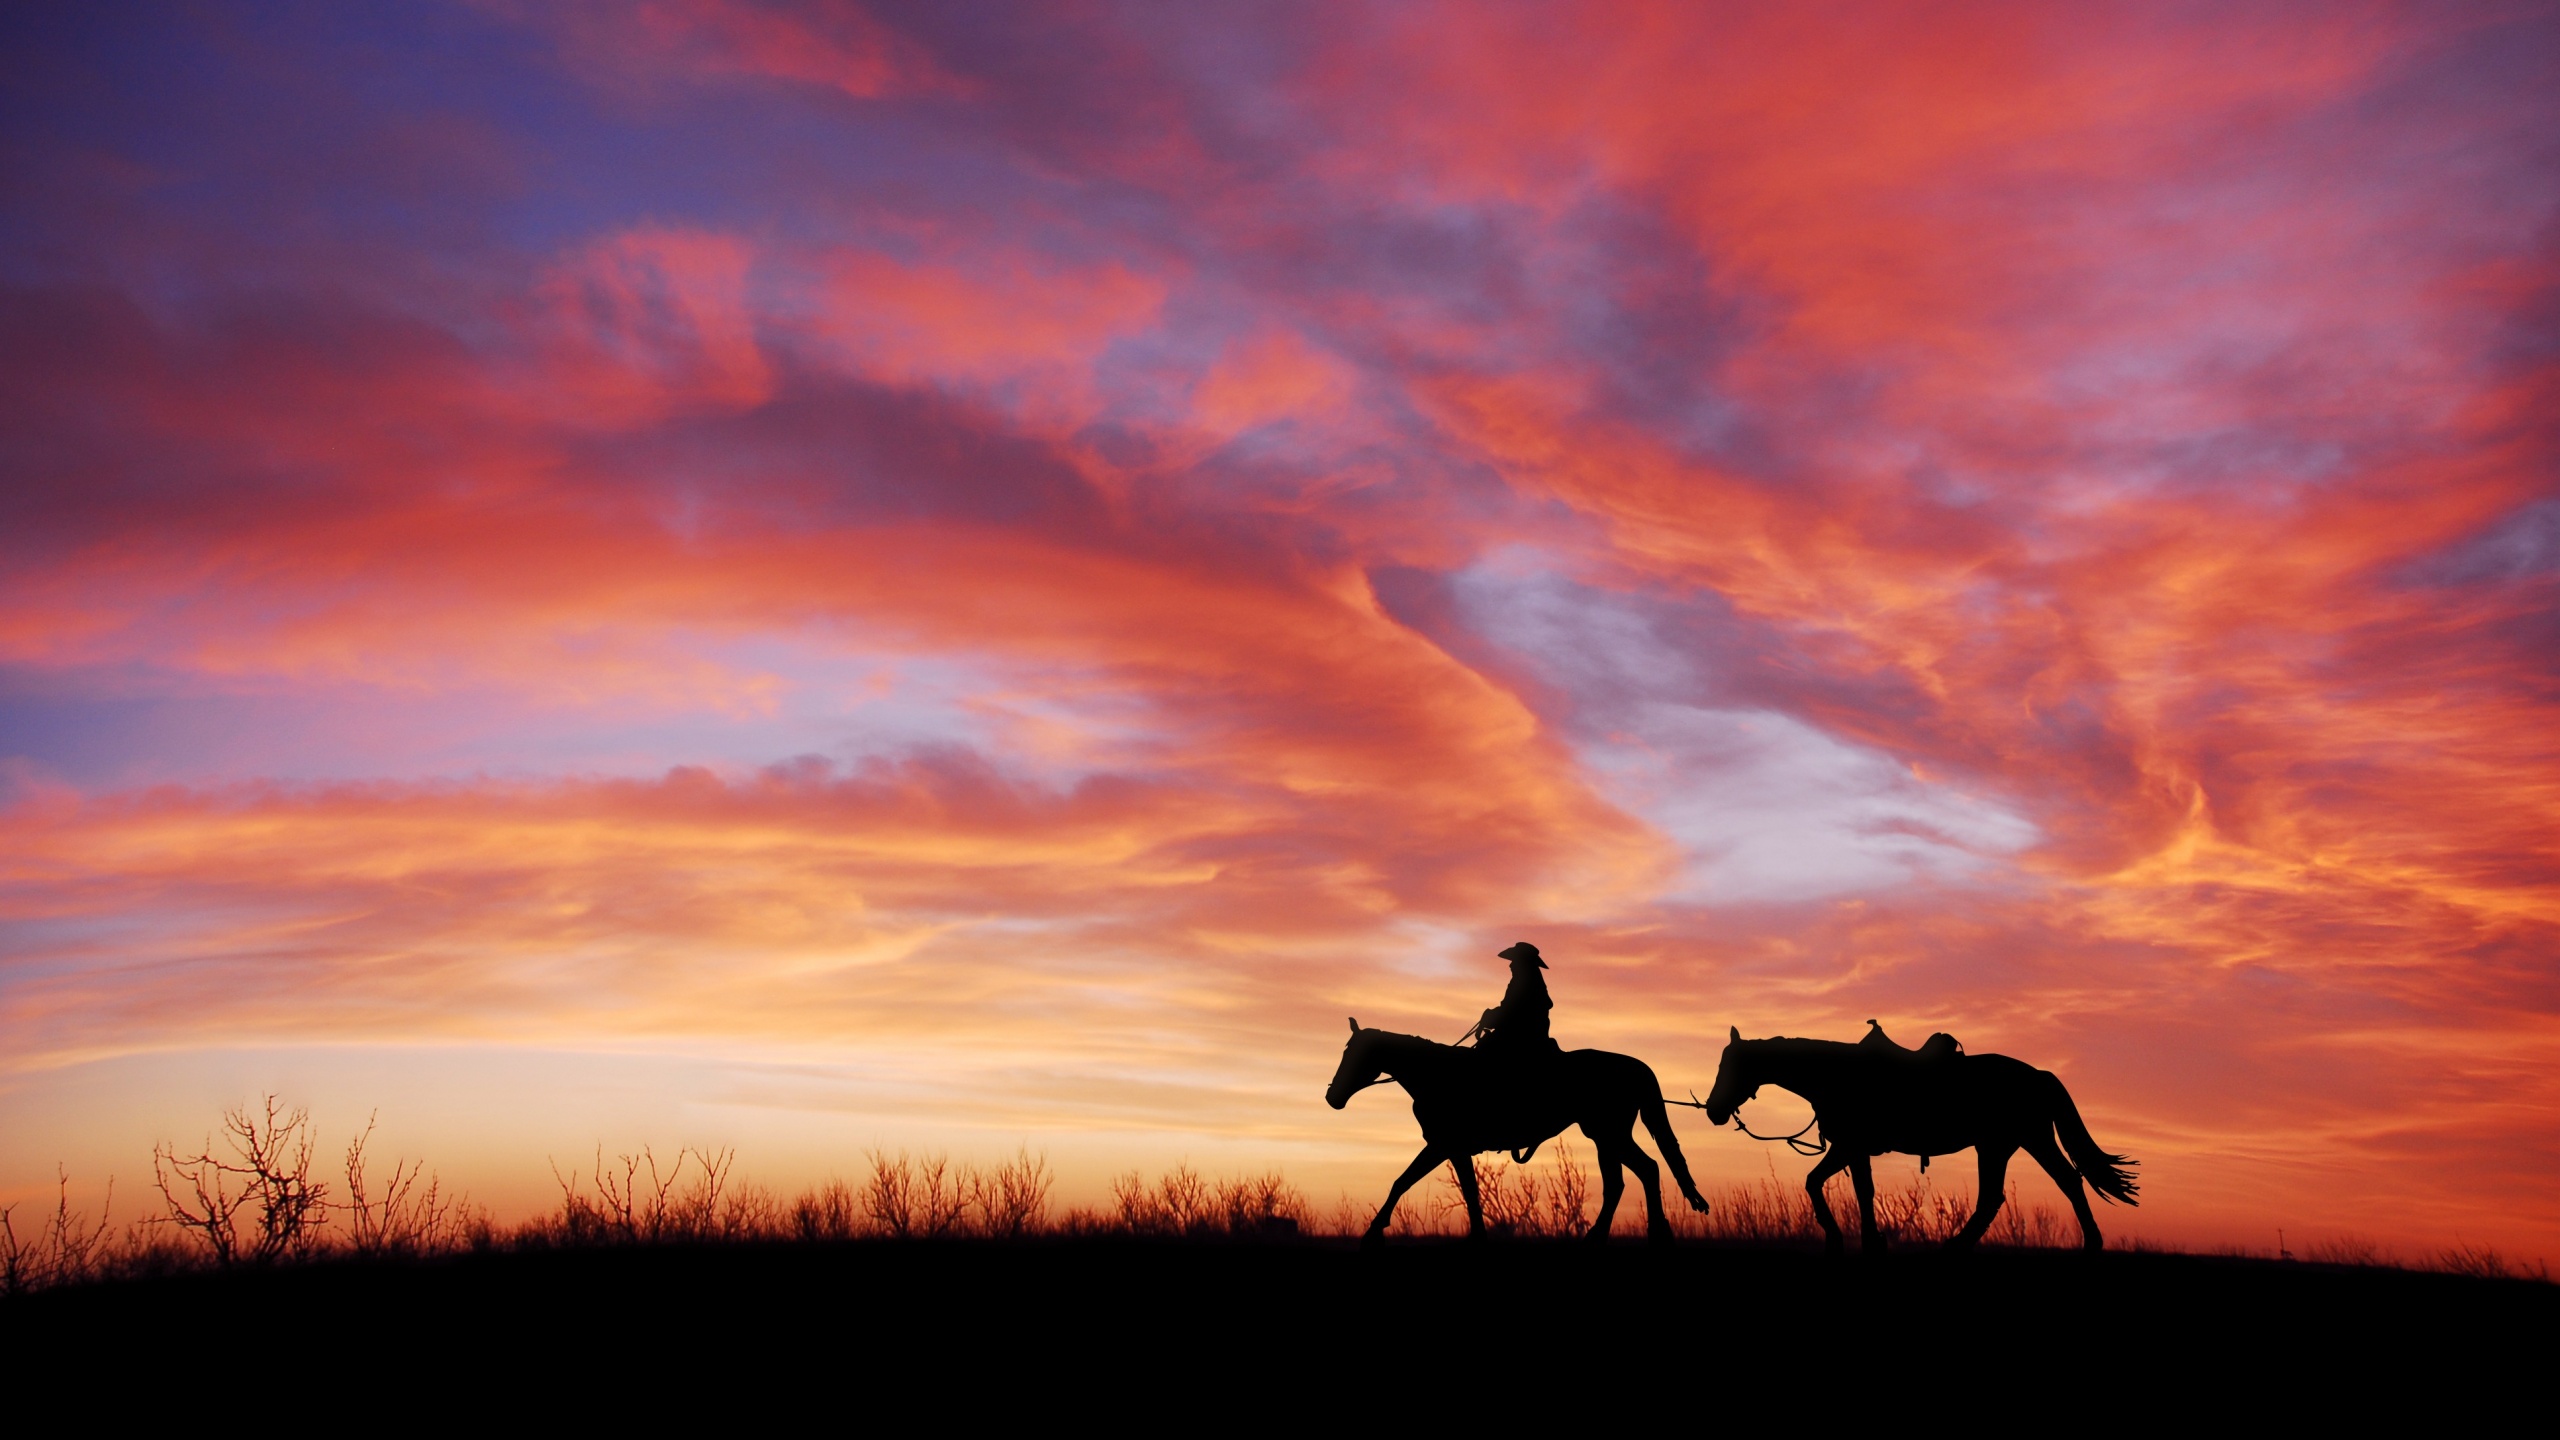 Sunset Horse Silhouette Acrylic Painting Hd Wallpaper : Wallpapers13.com